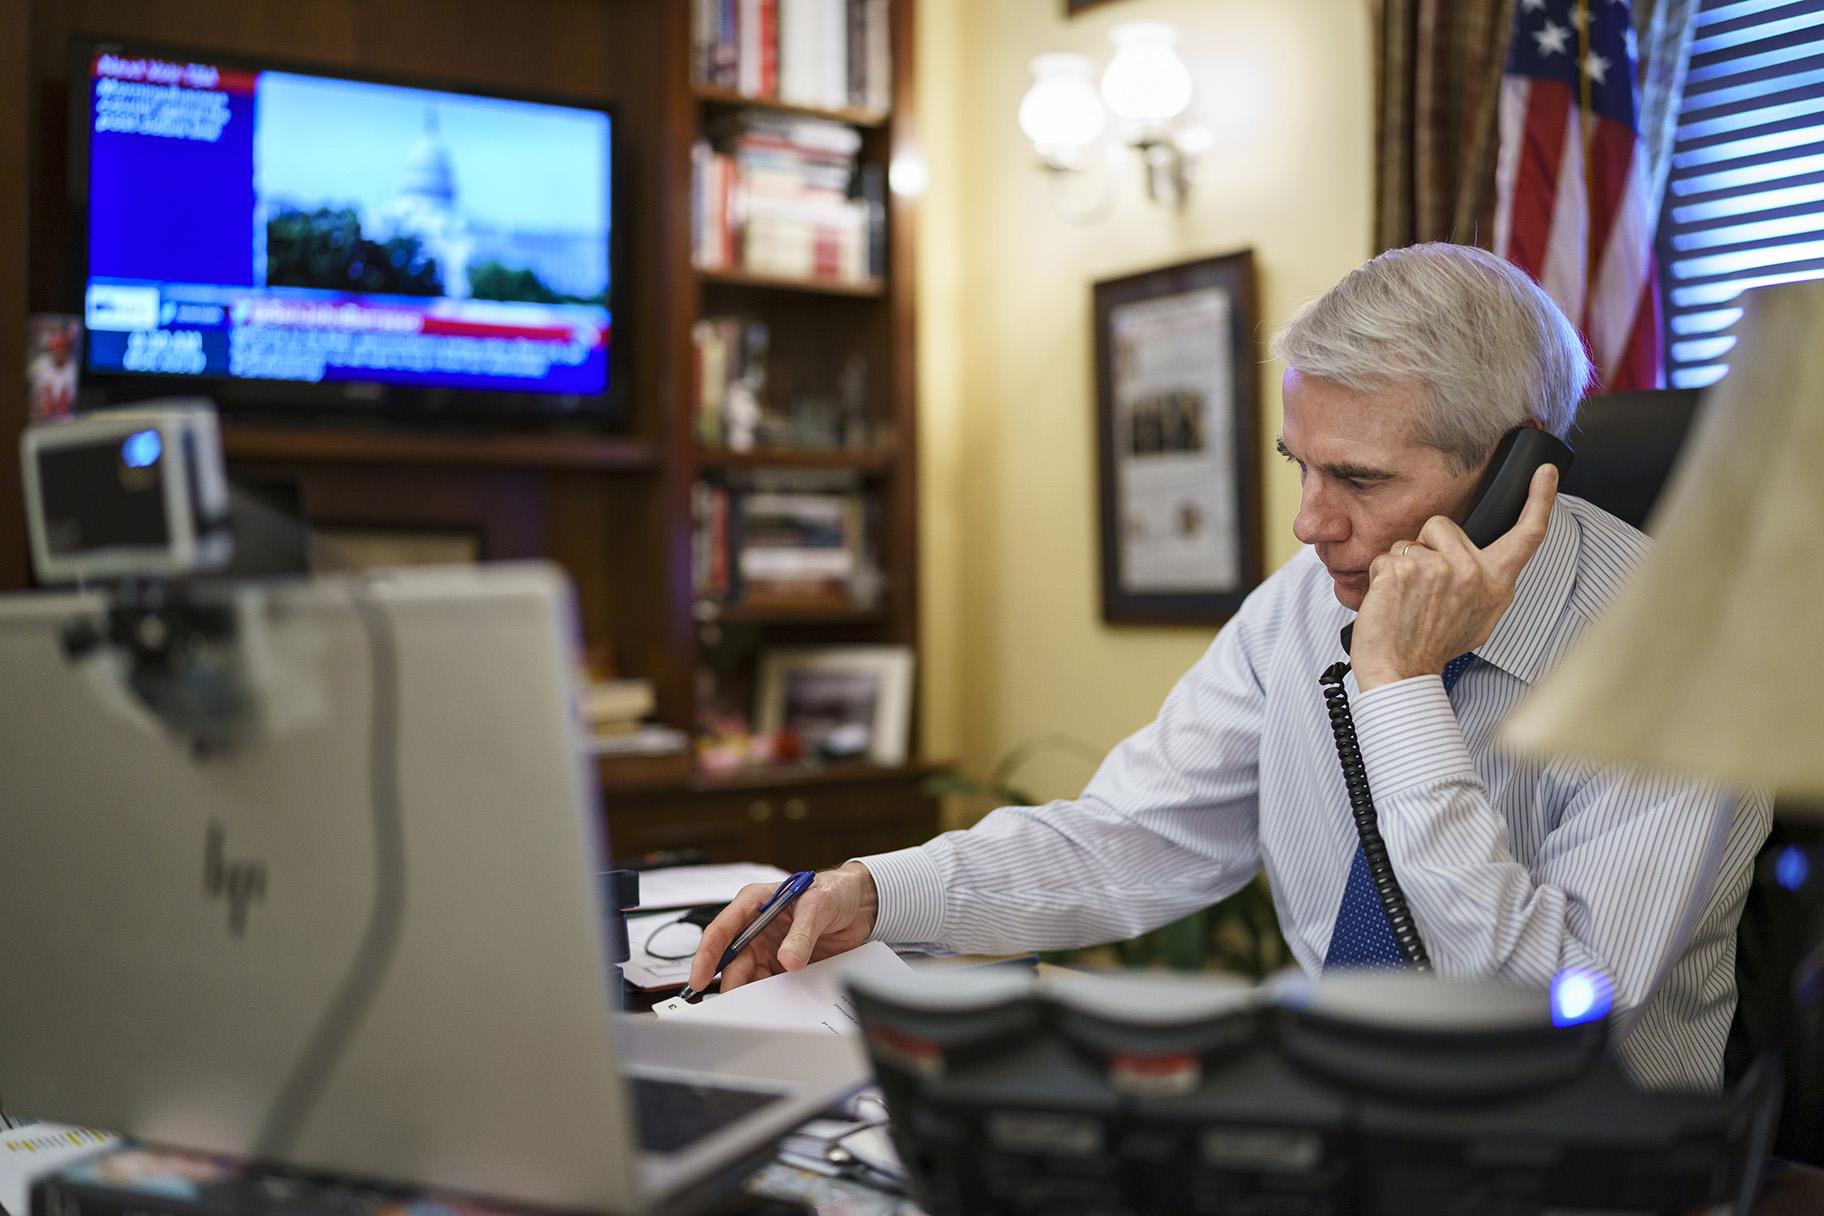 Sen. Rob Portman, R-Ohio, the top Republican negotiator on the bipartisan infrastructure bill, works from his office on Capitol Hill as he continues to shepherd the  trillion legislation closer to passage, in Washington, Monday, Aug. 9, 2021. (AP Photo / J. Scott Applewhite)